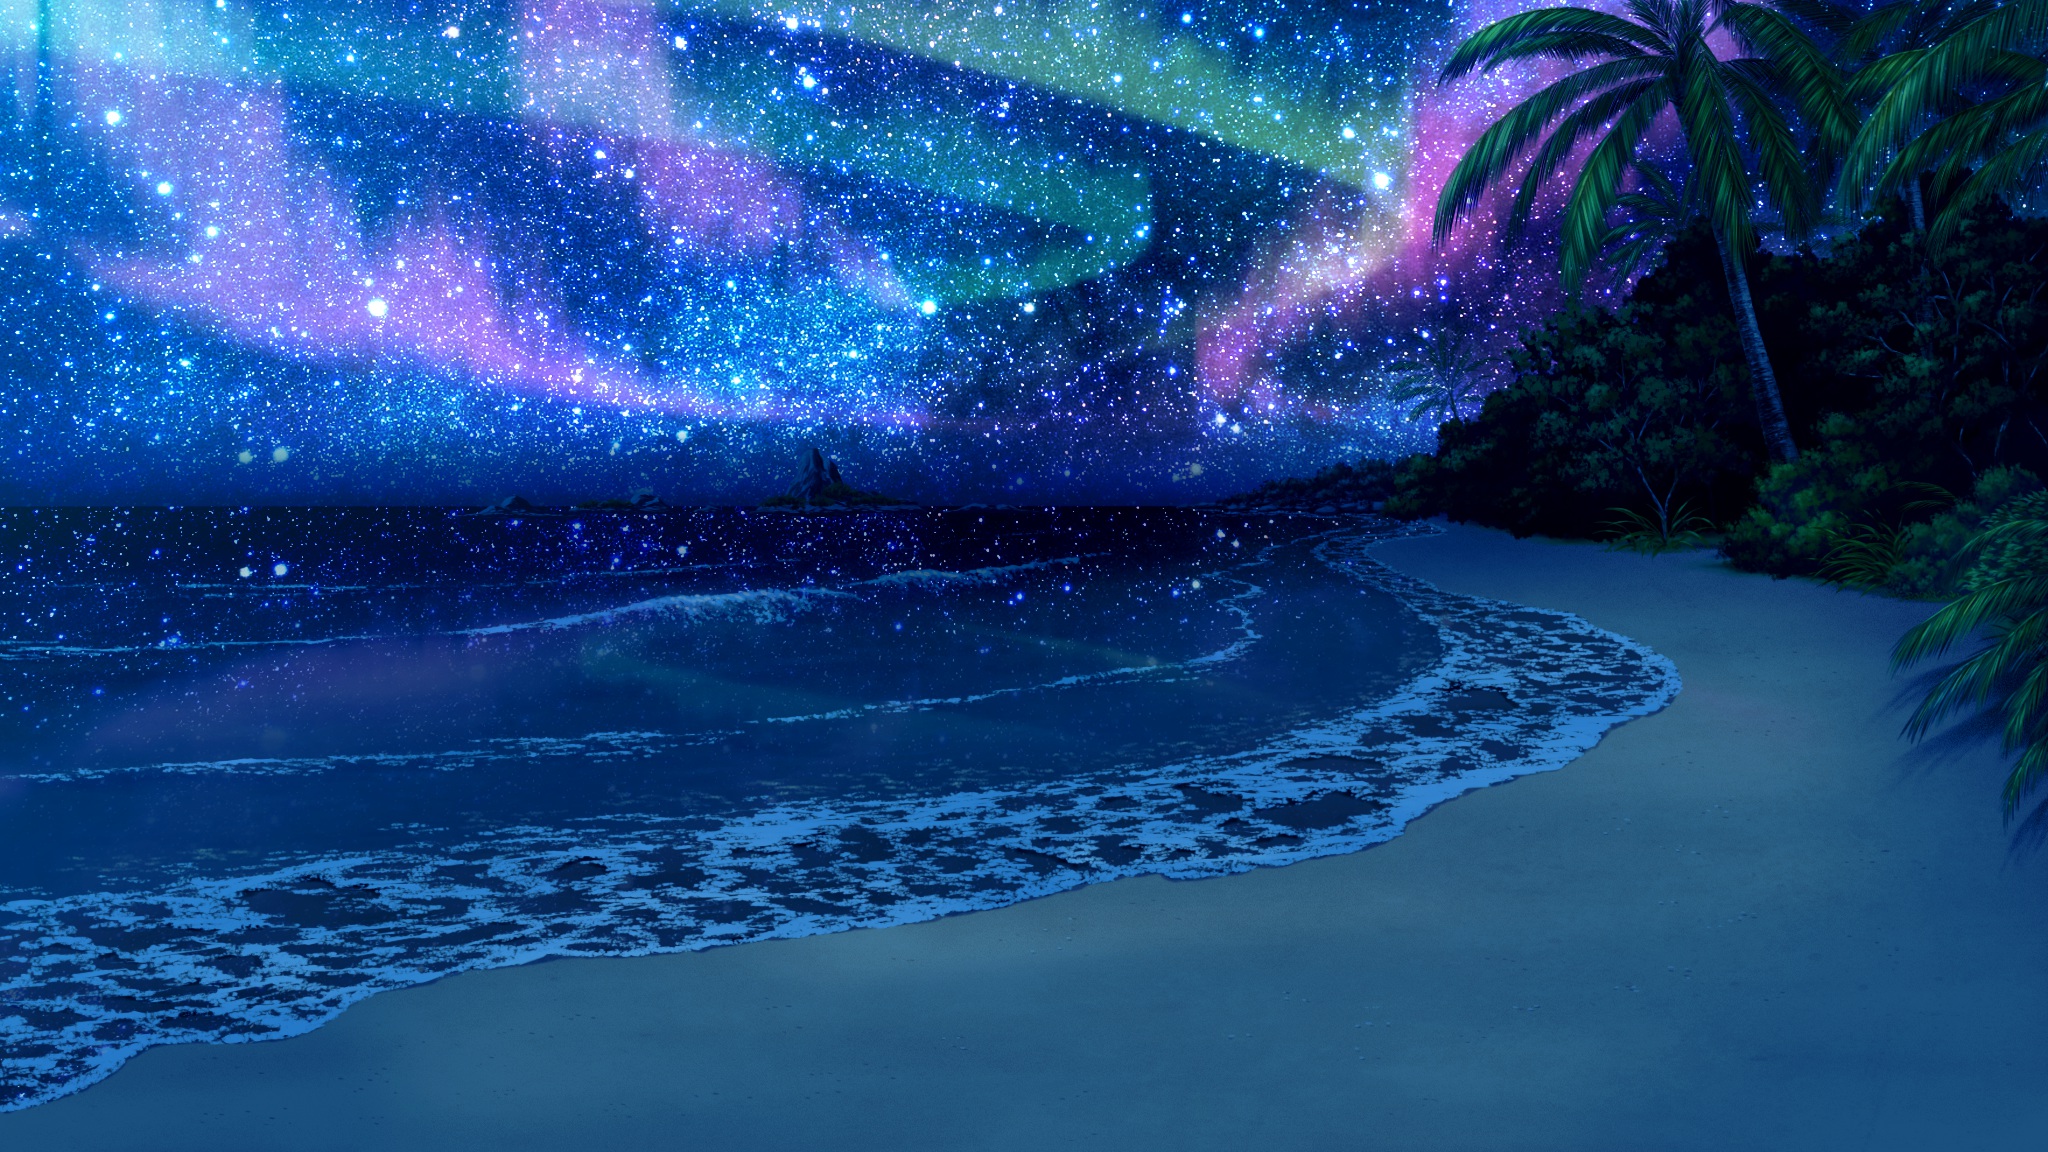 guardian place, Beach, Game, Cg, Guardian, Place, Scenic, Skyfish, Stars Wallpaper